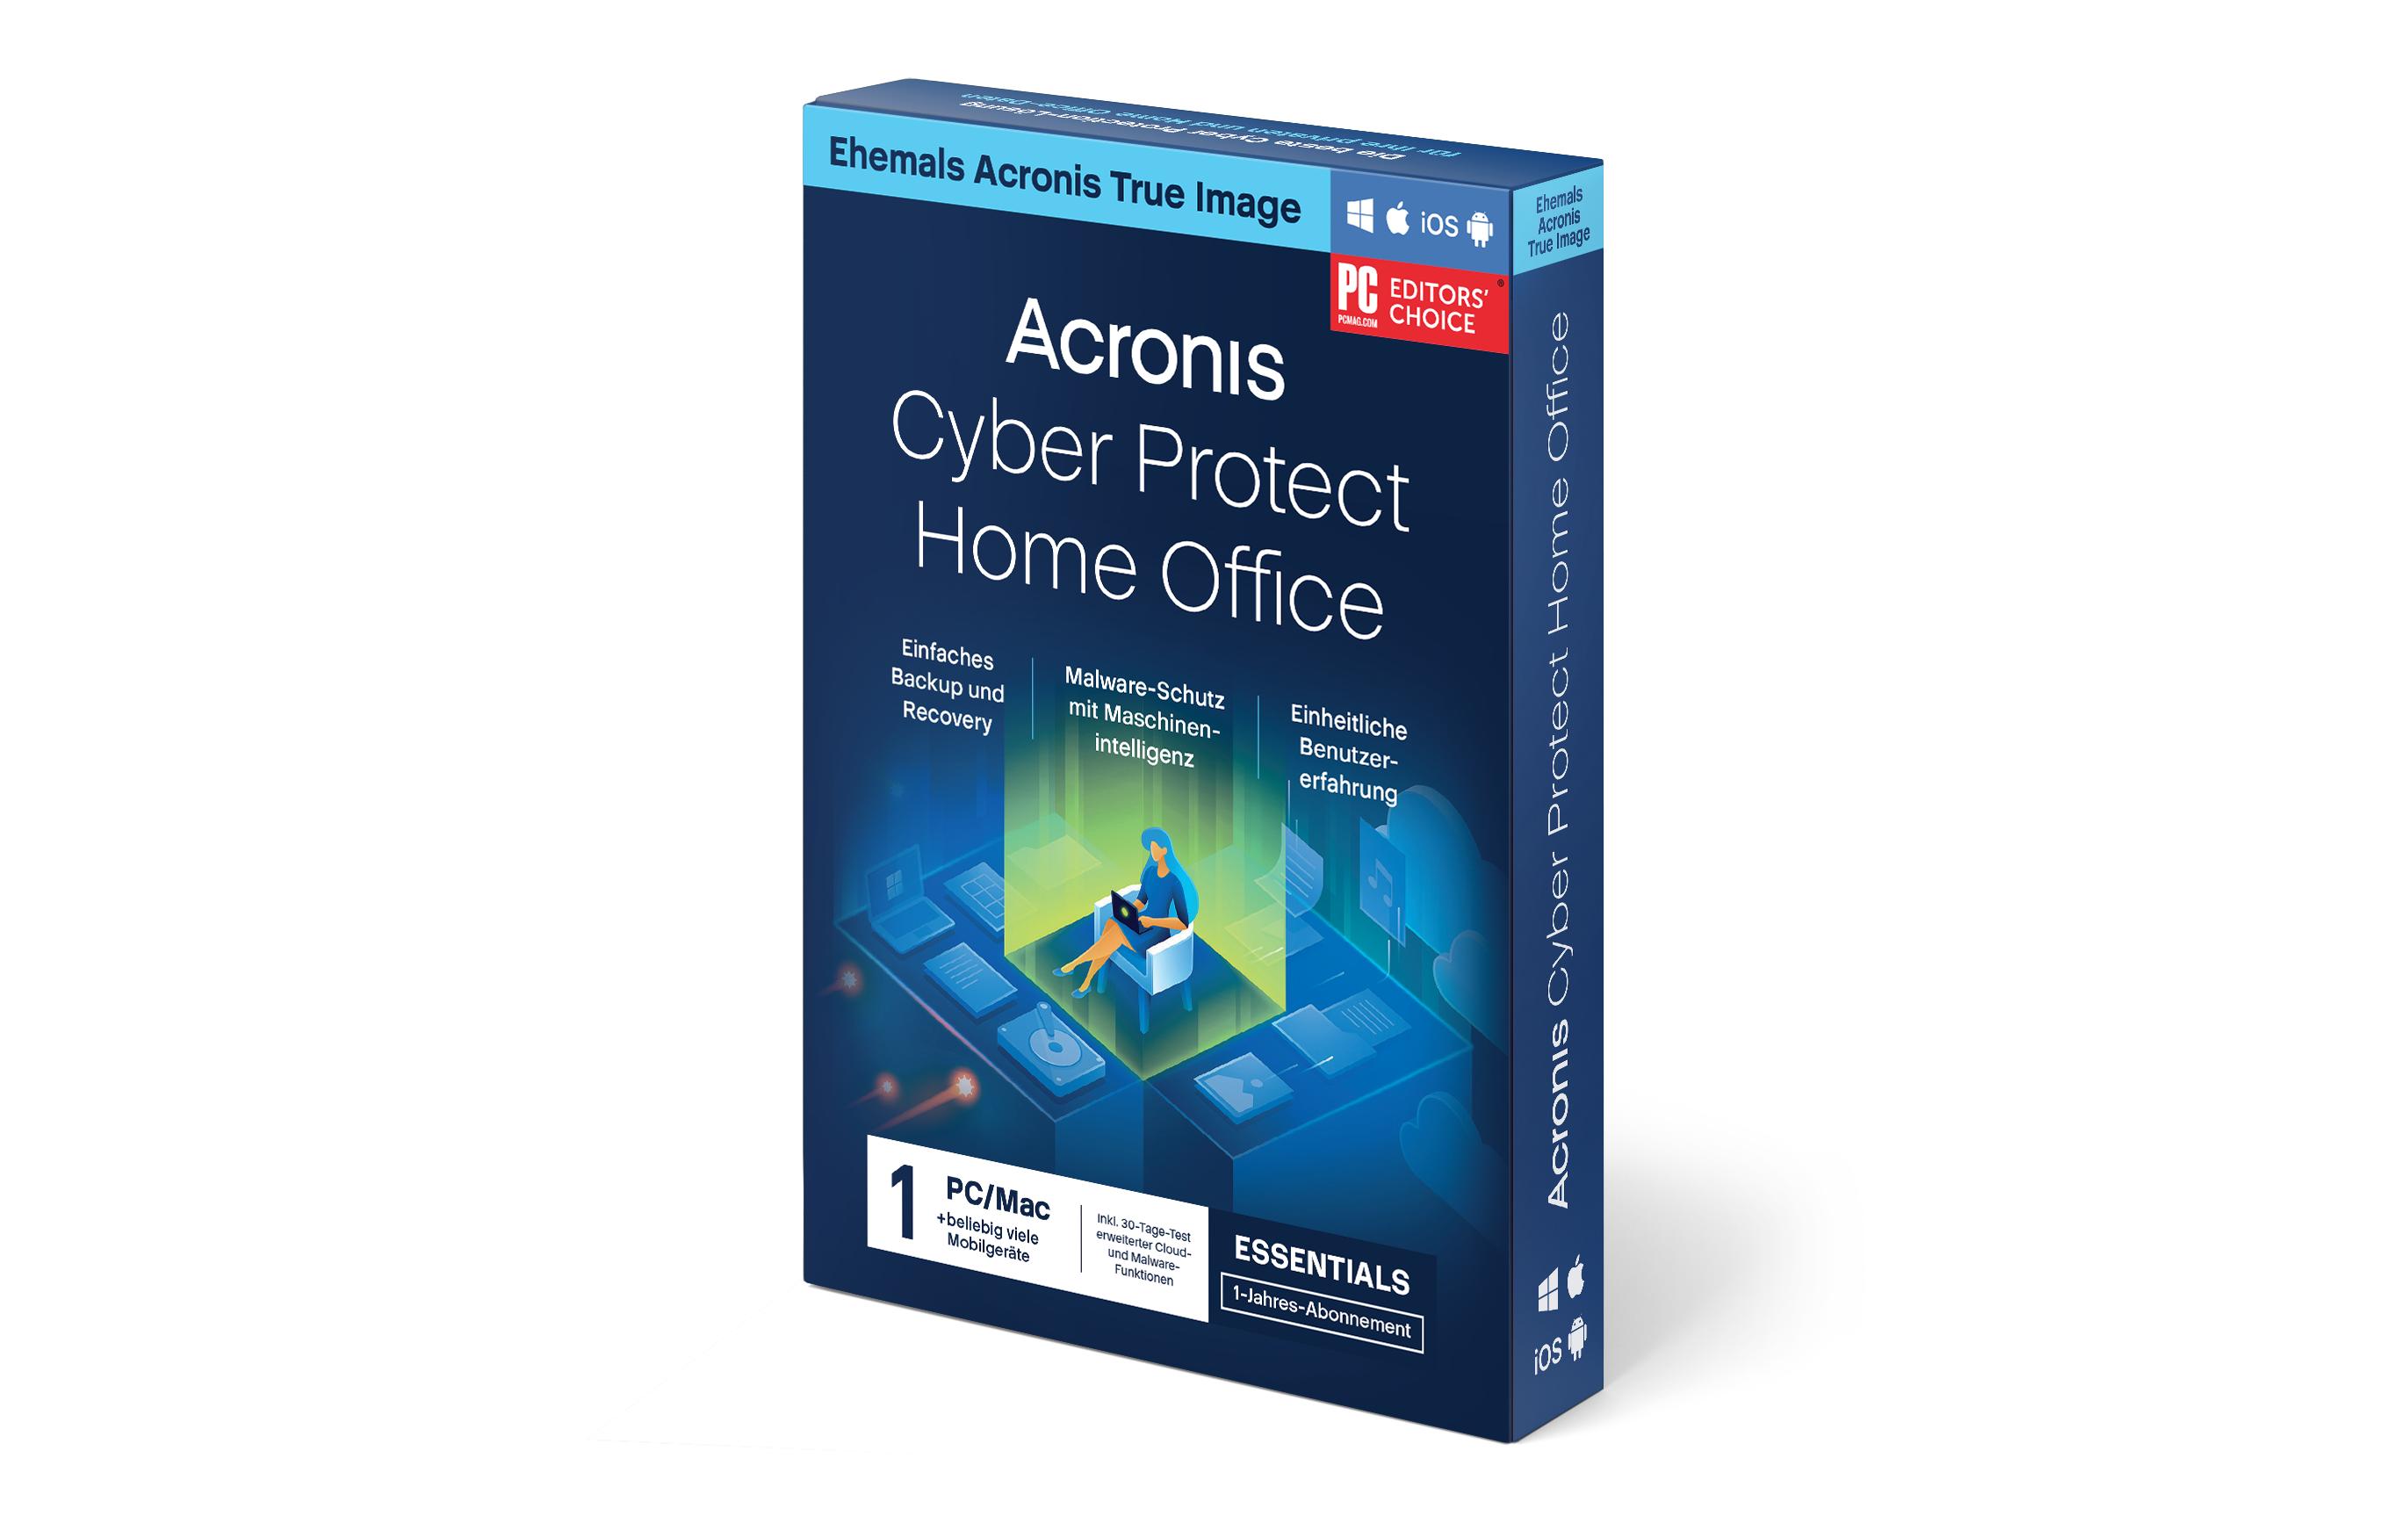 Acronis Cyber Protect Home Office Essentials Box, Subscr. 1y, 1 PC